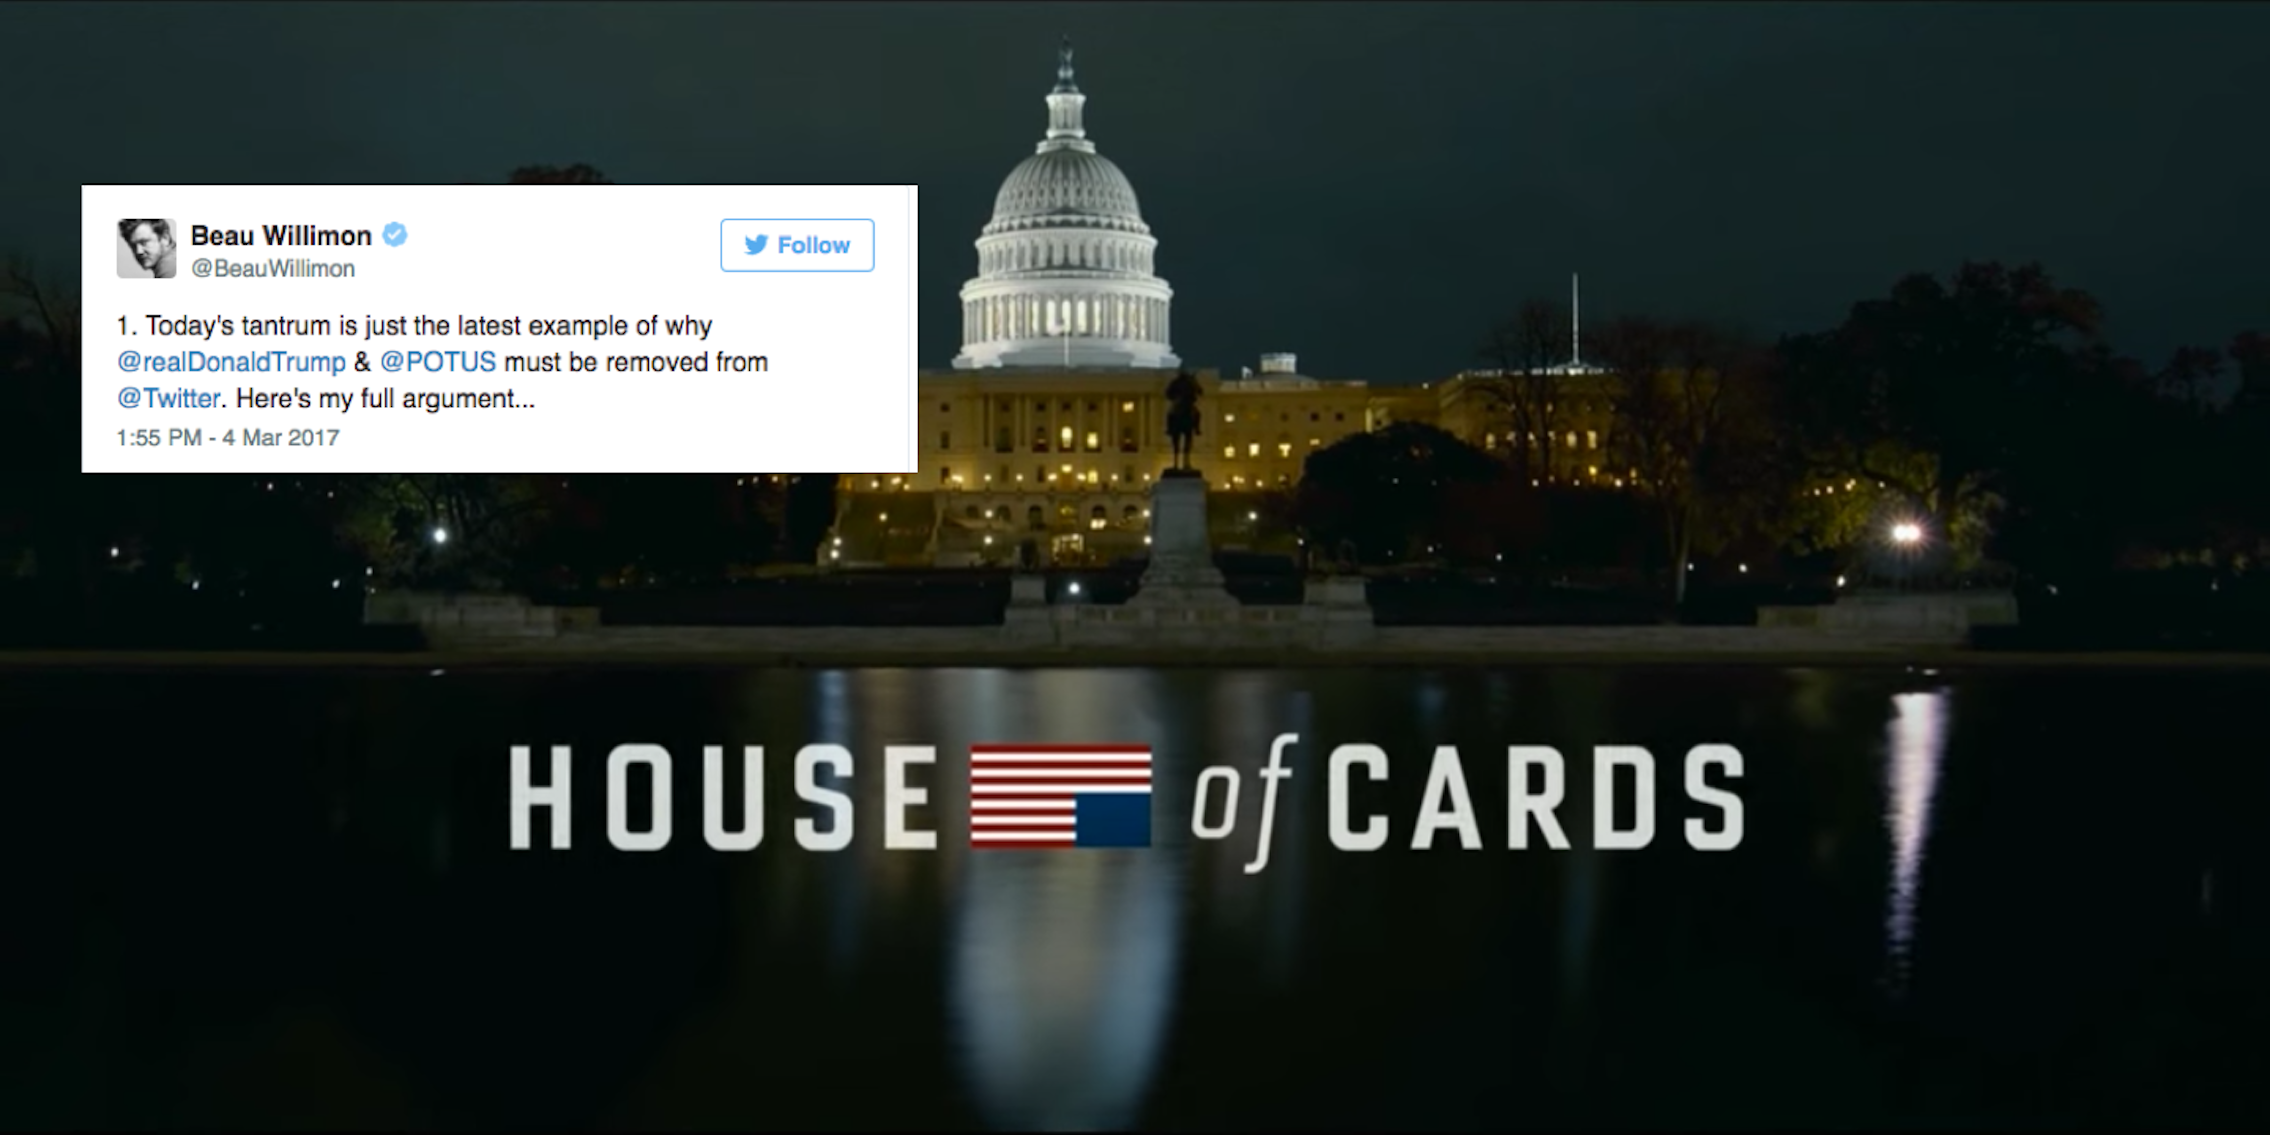 house of cards intro creator tweets